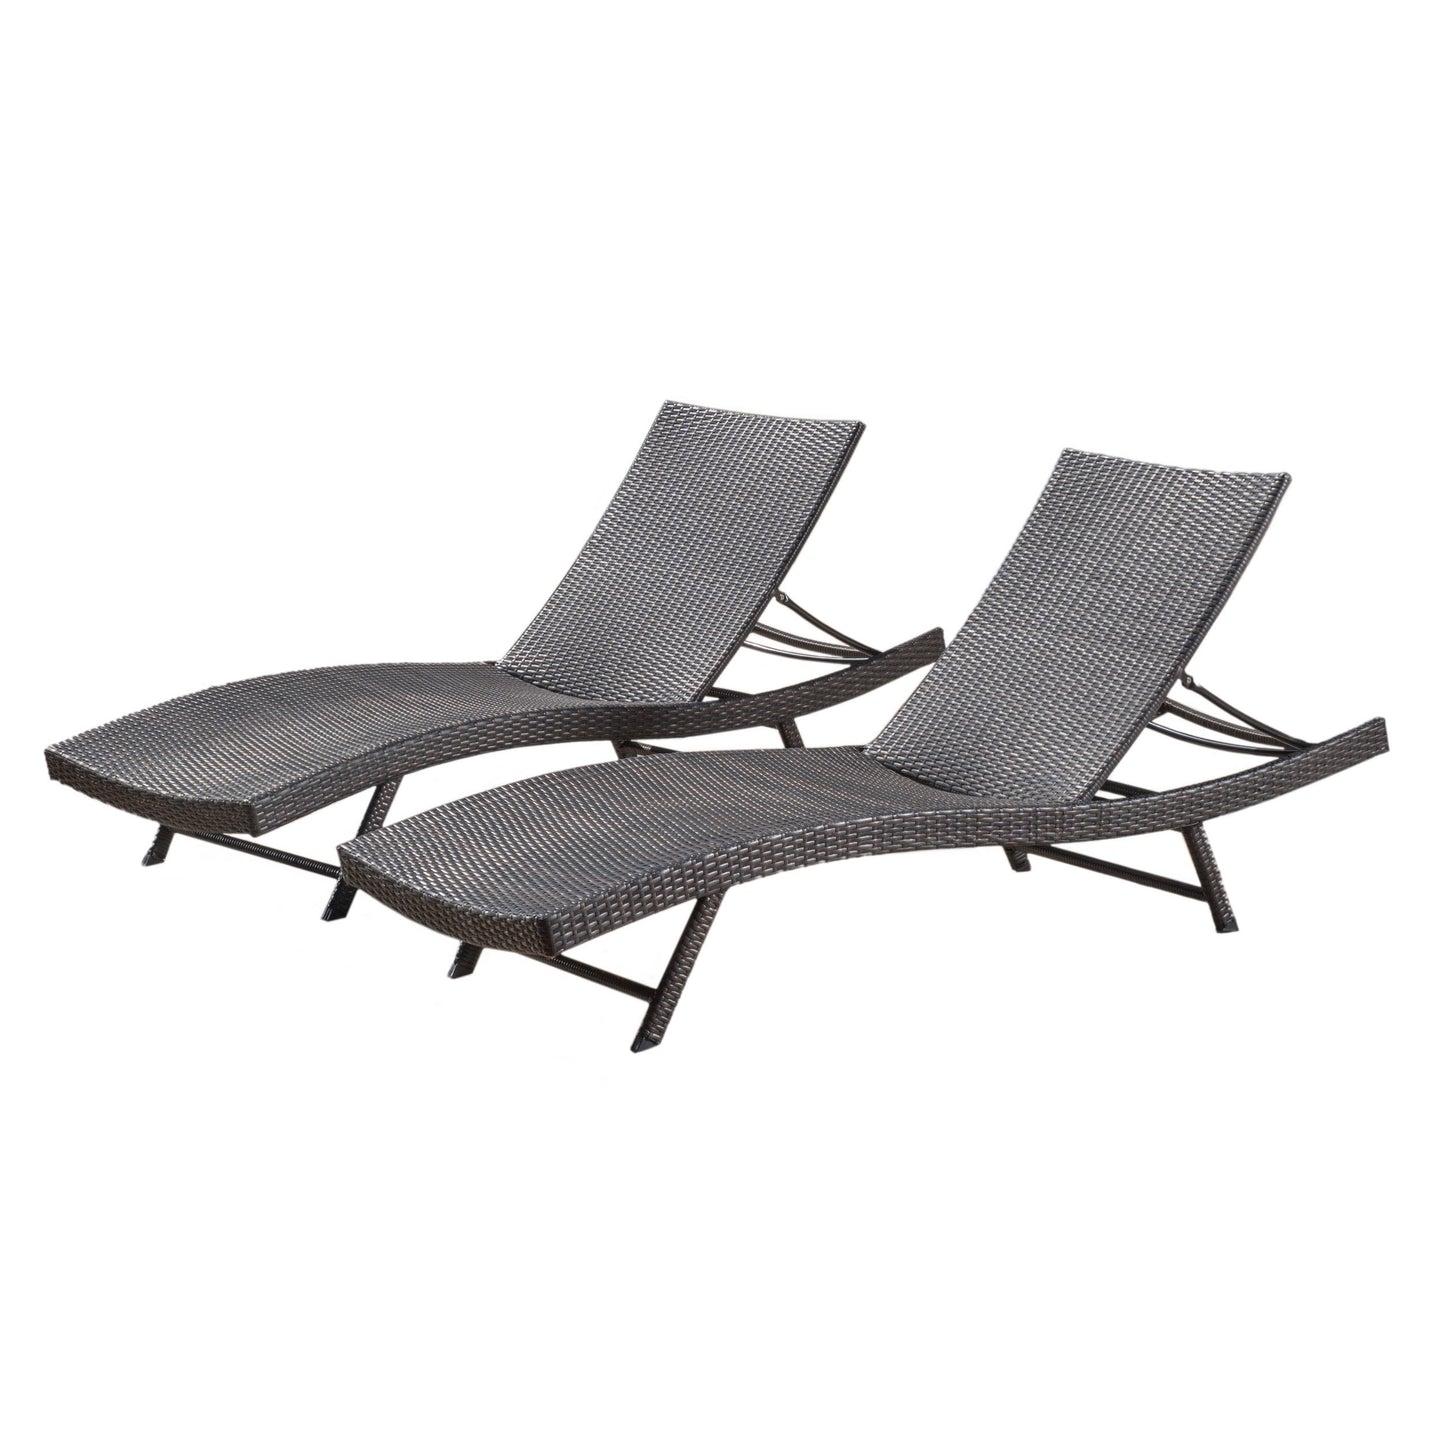 Eliana Outdoor Brown Wicker Adjustable Chaise Lounge Chair